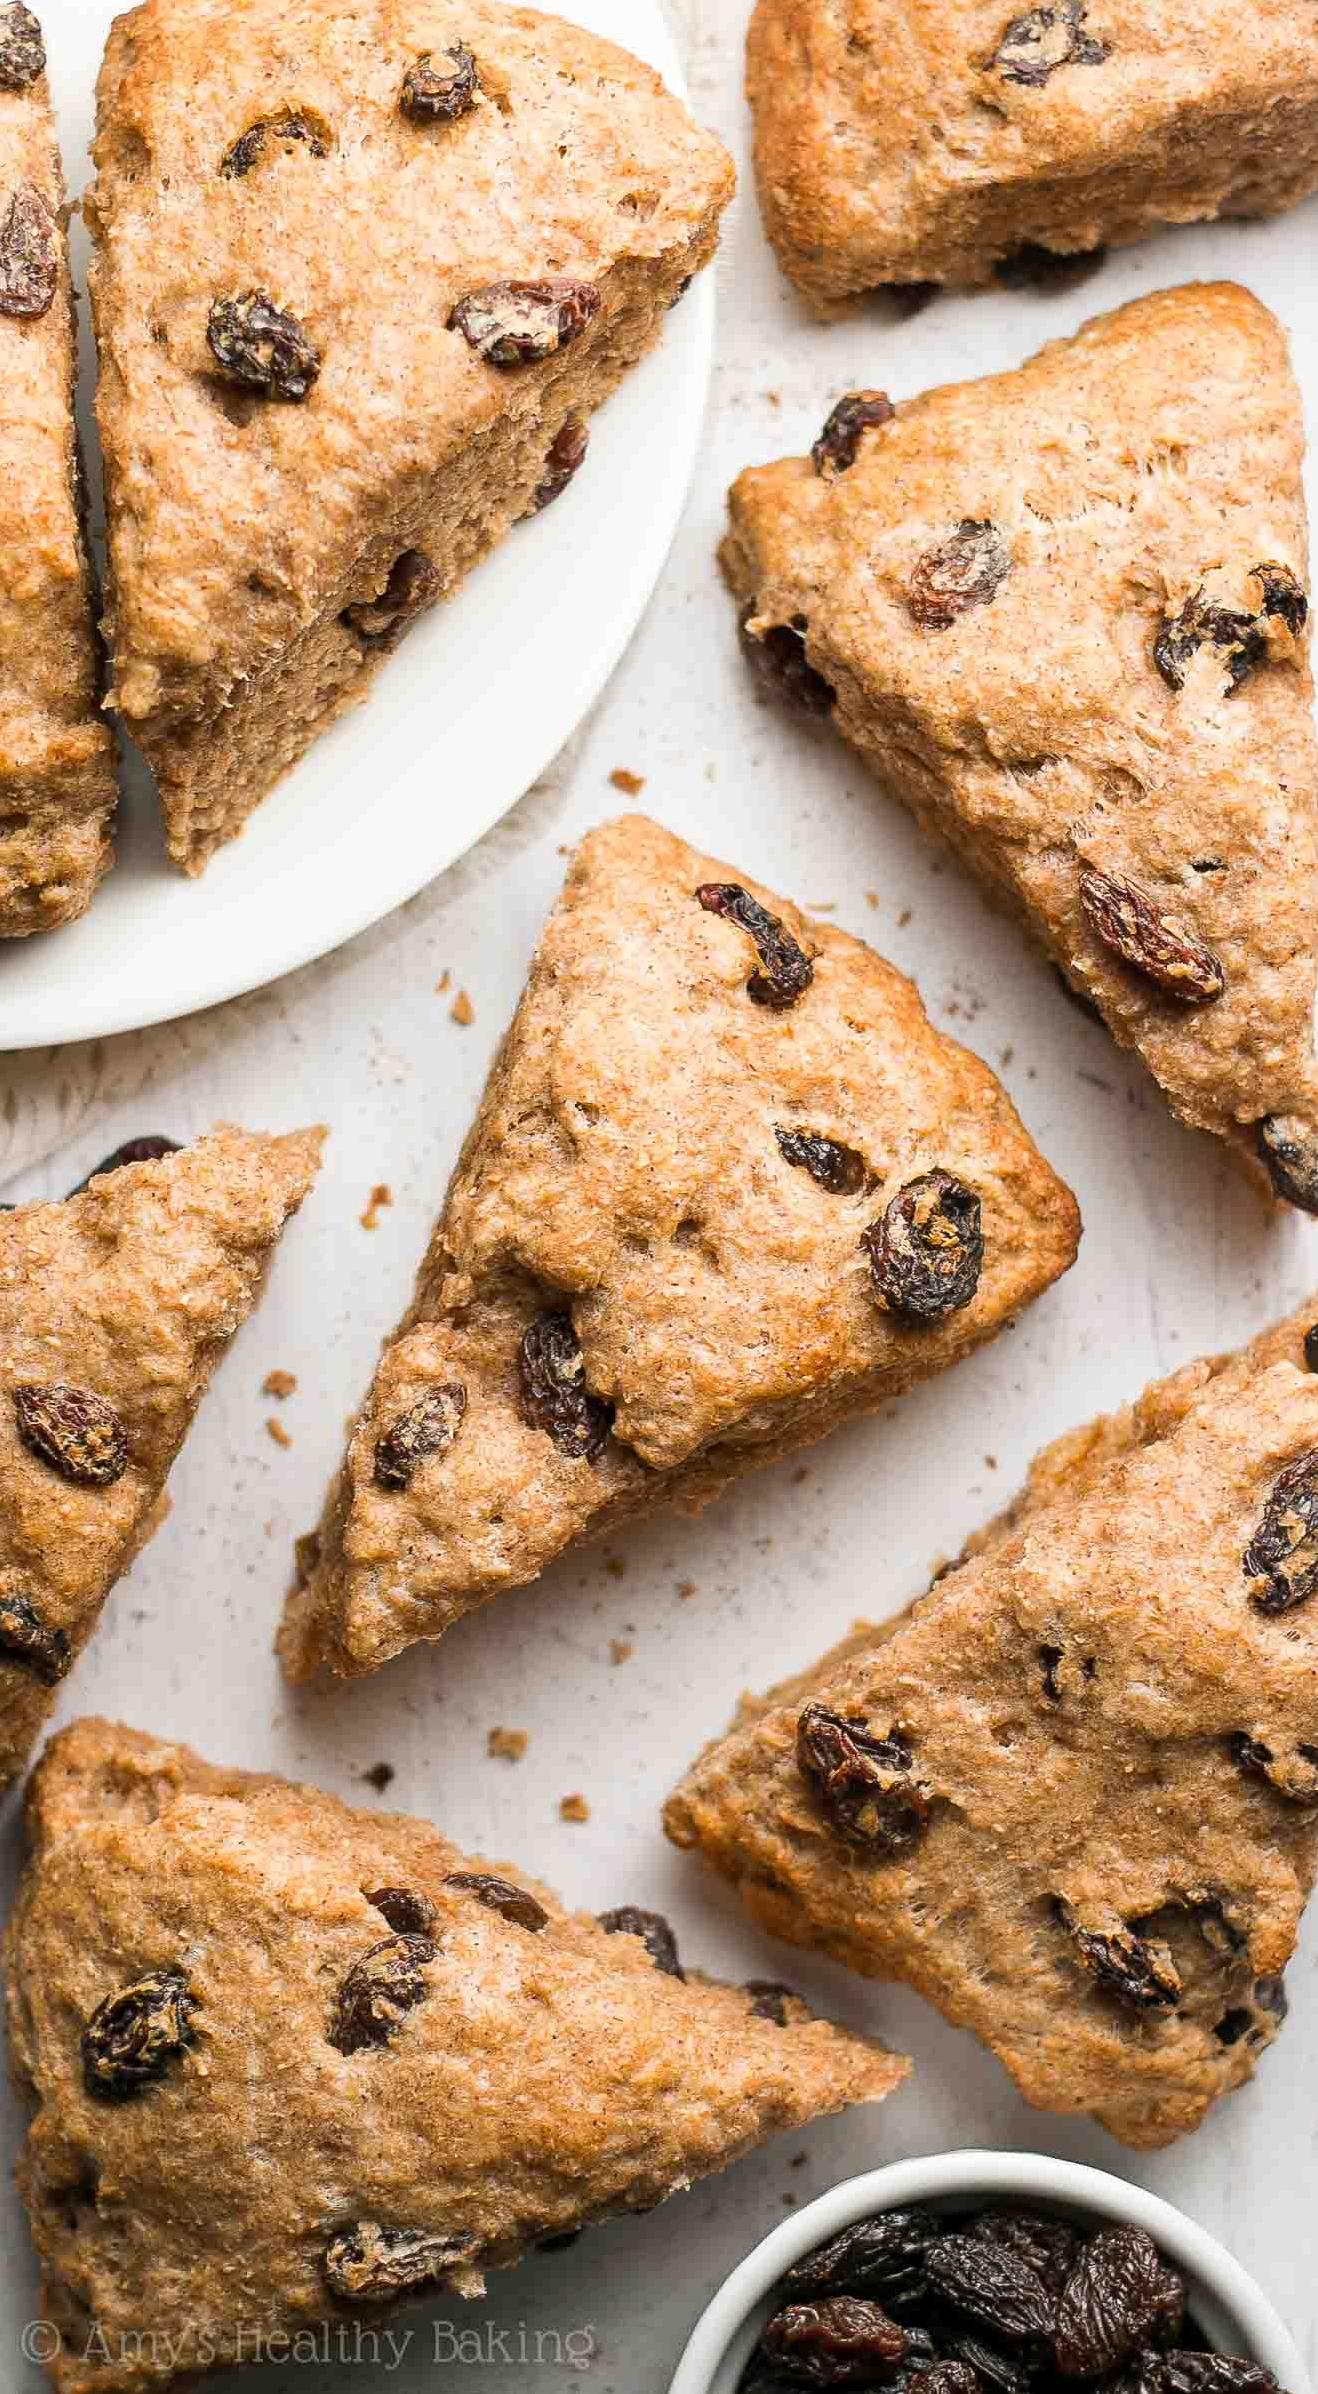  A scone perfect for those with dietary restrictions or allergies